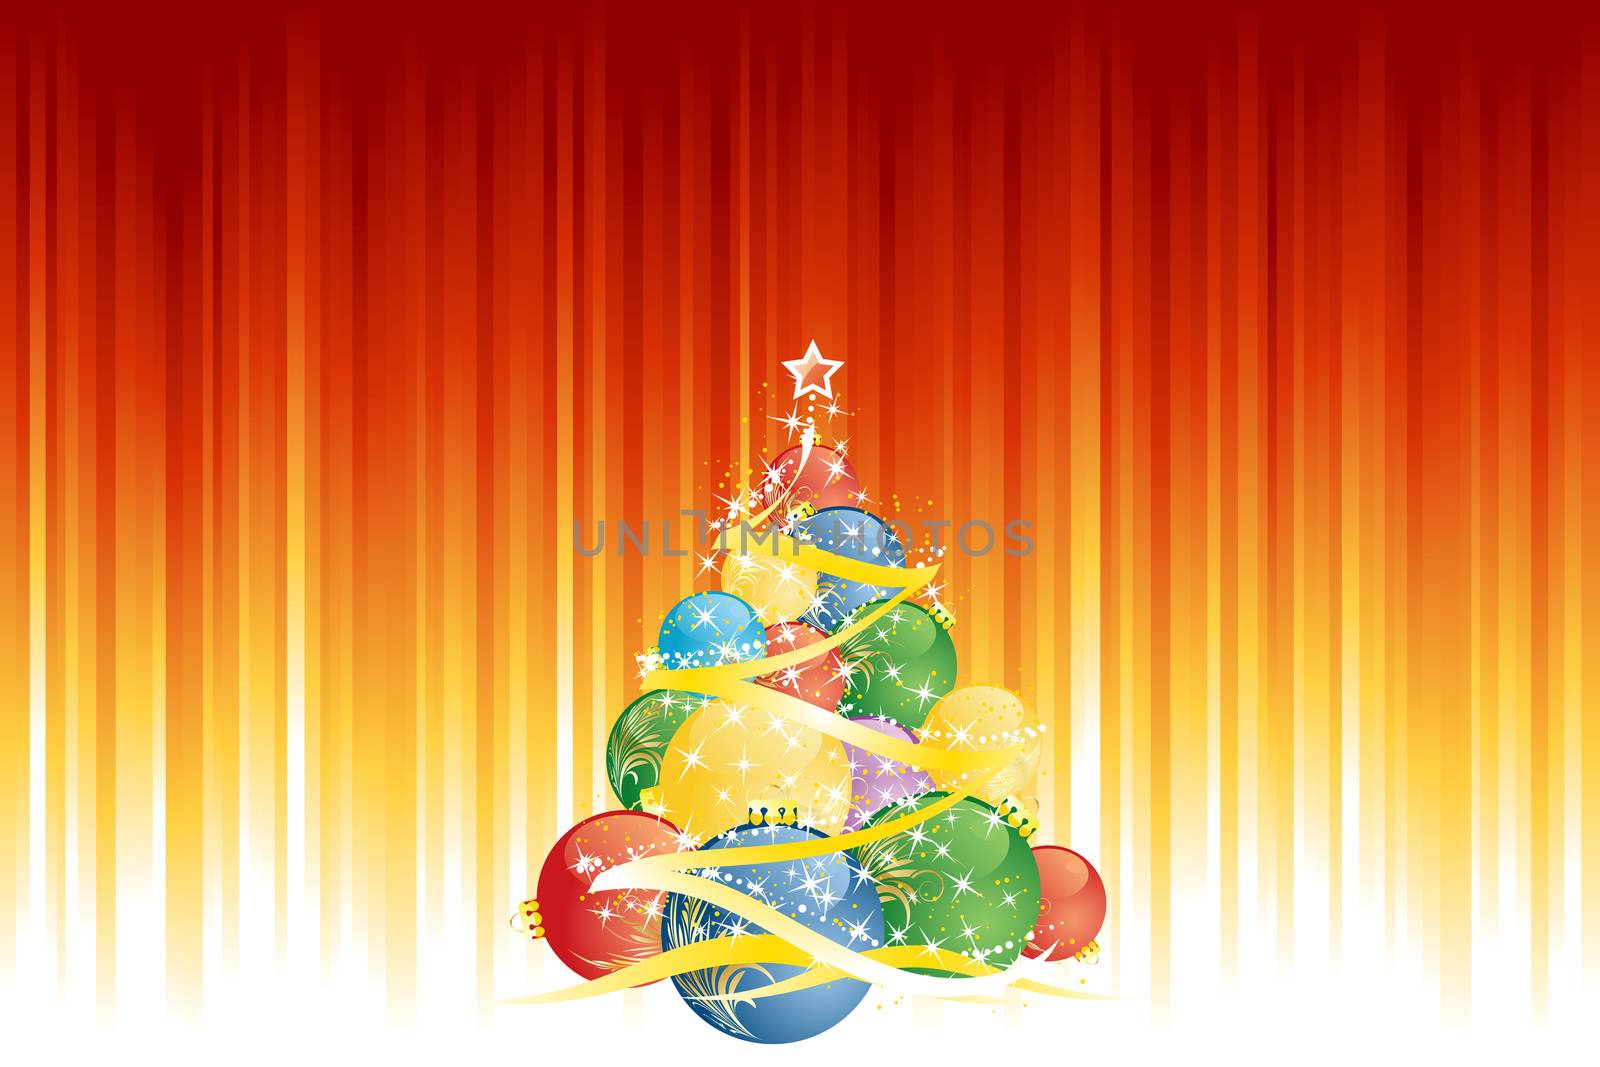 Magic Christmas tree and vertical red golden stripes by WaD